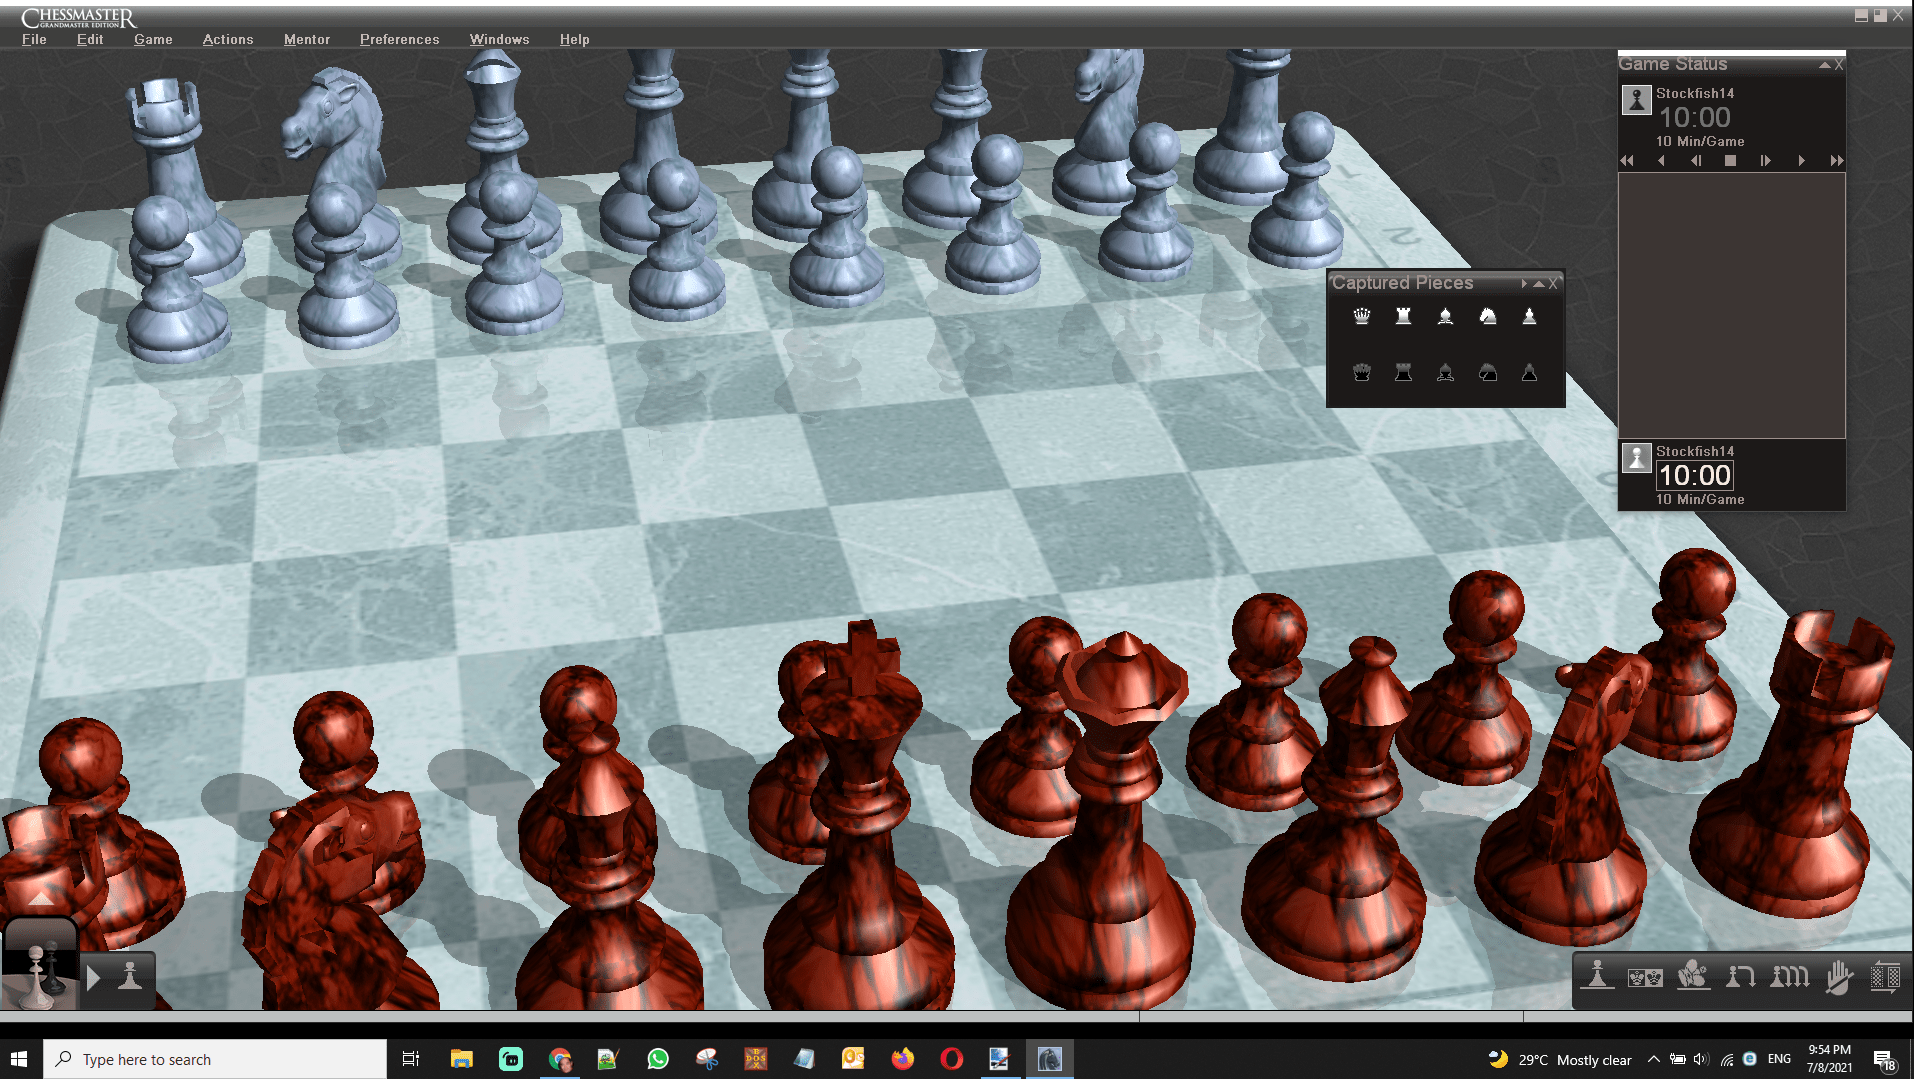 Chessmaster Grandmaster Edition PC. The Most Fun Chess Game To